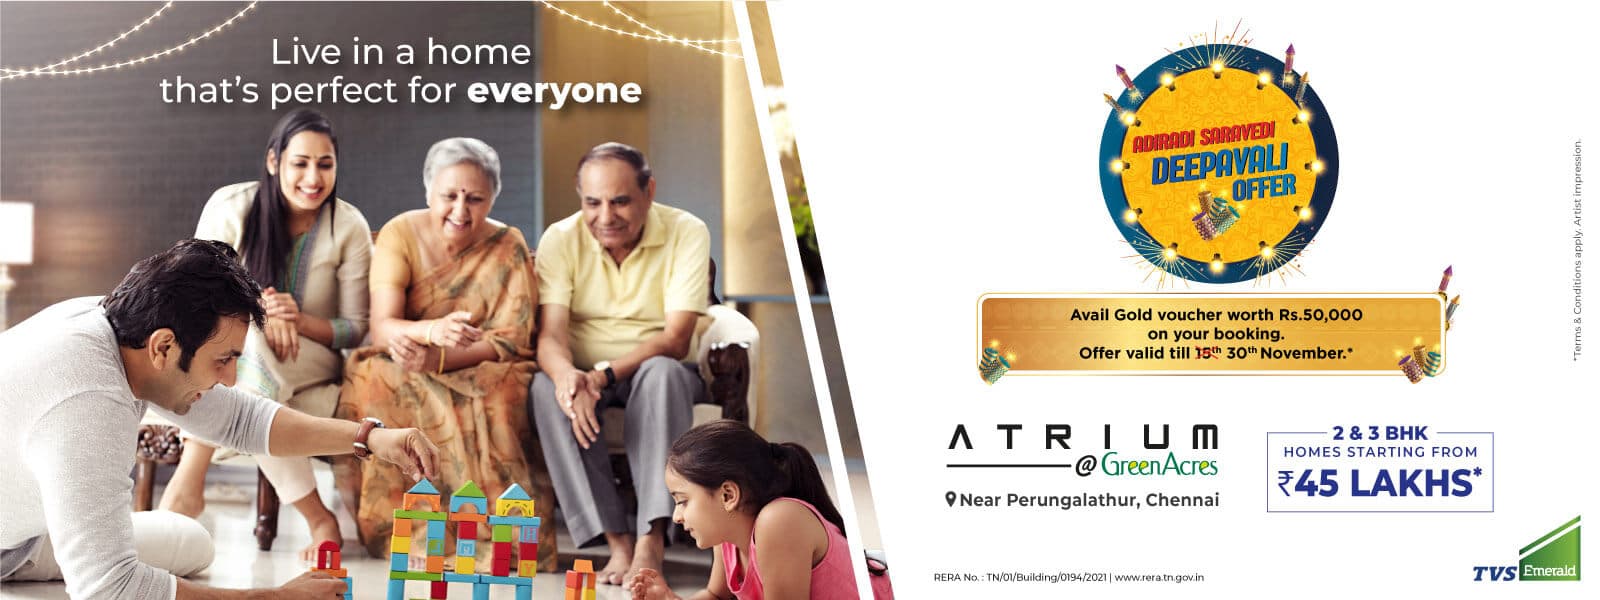 Avail gold voucher worth Rs.50,000 on your booking at TVS Emerald Atrium, Chennai Update